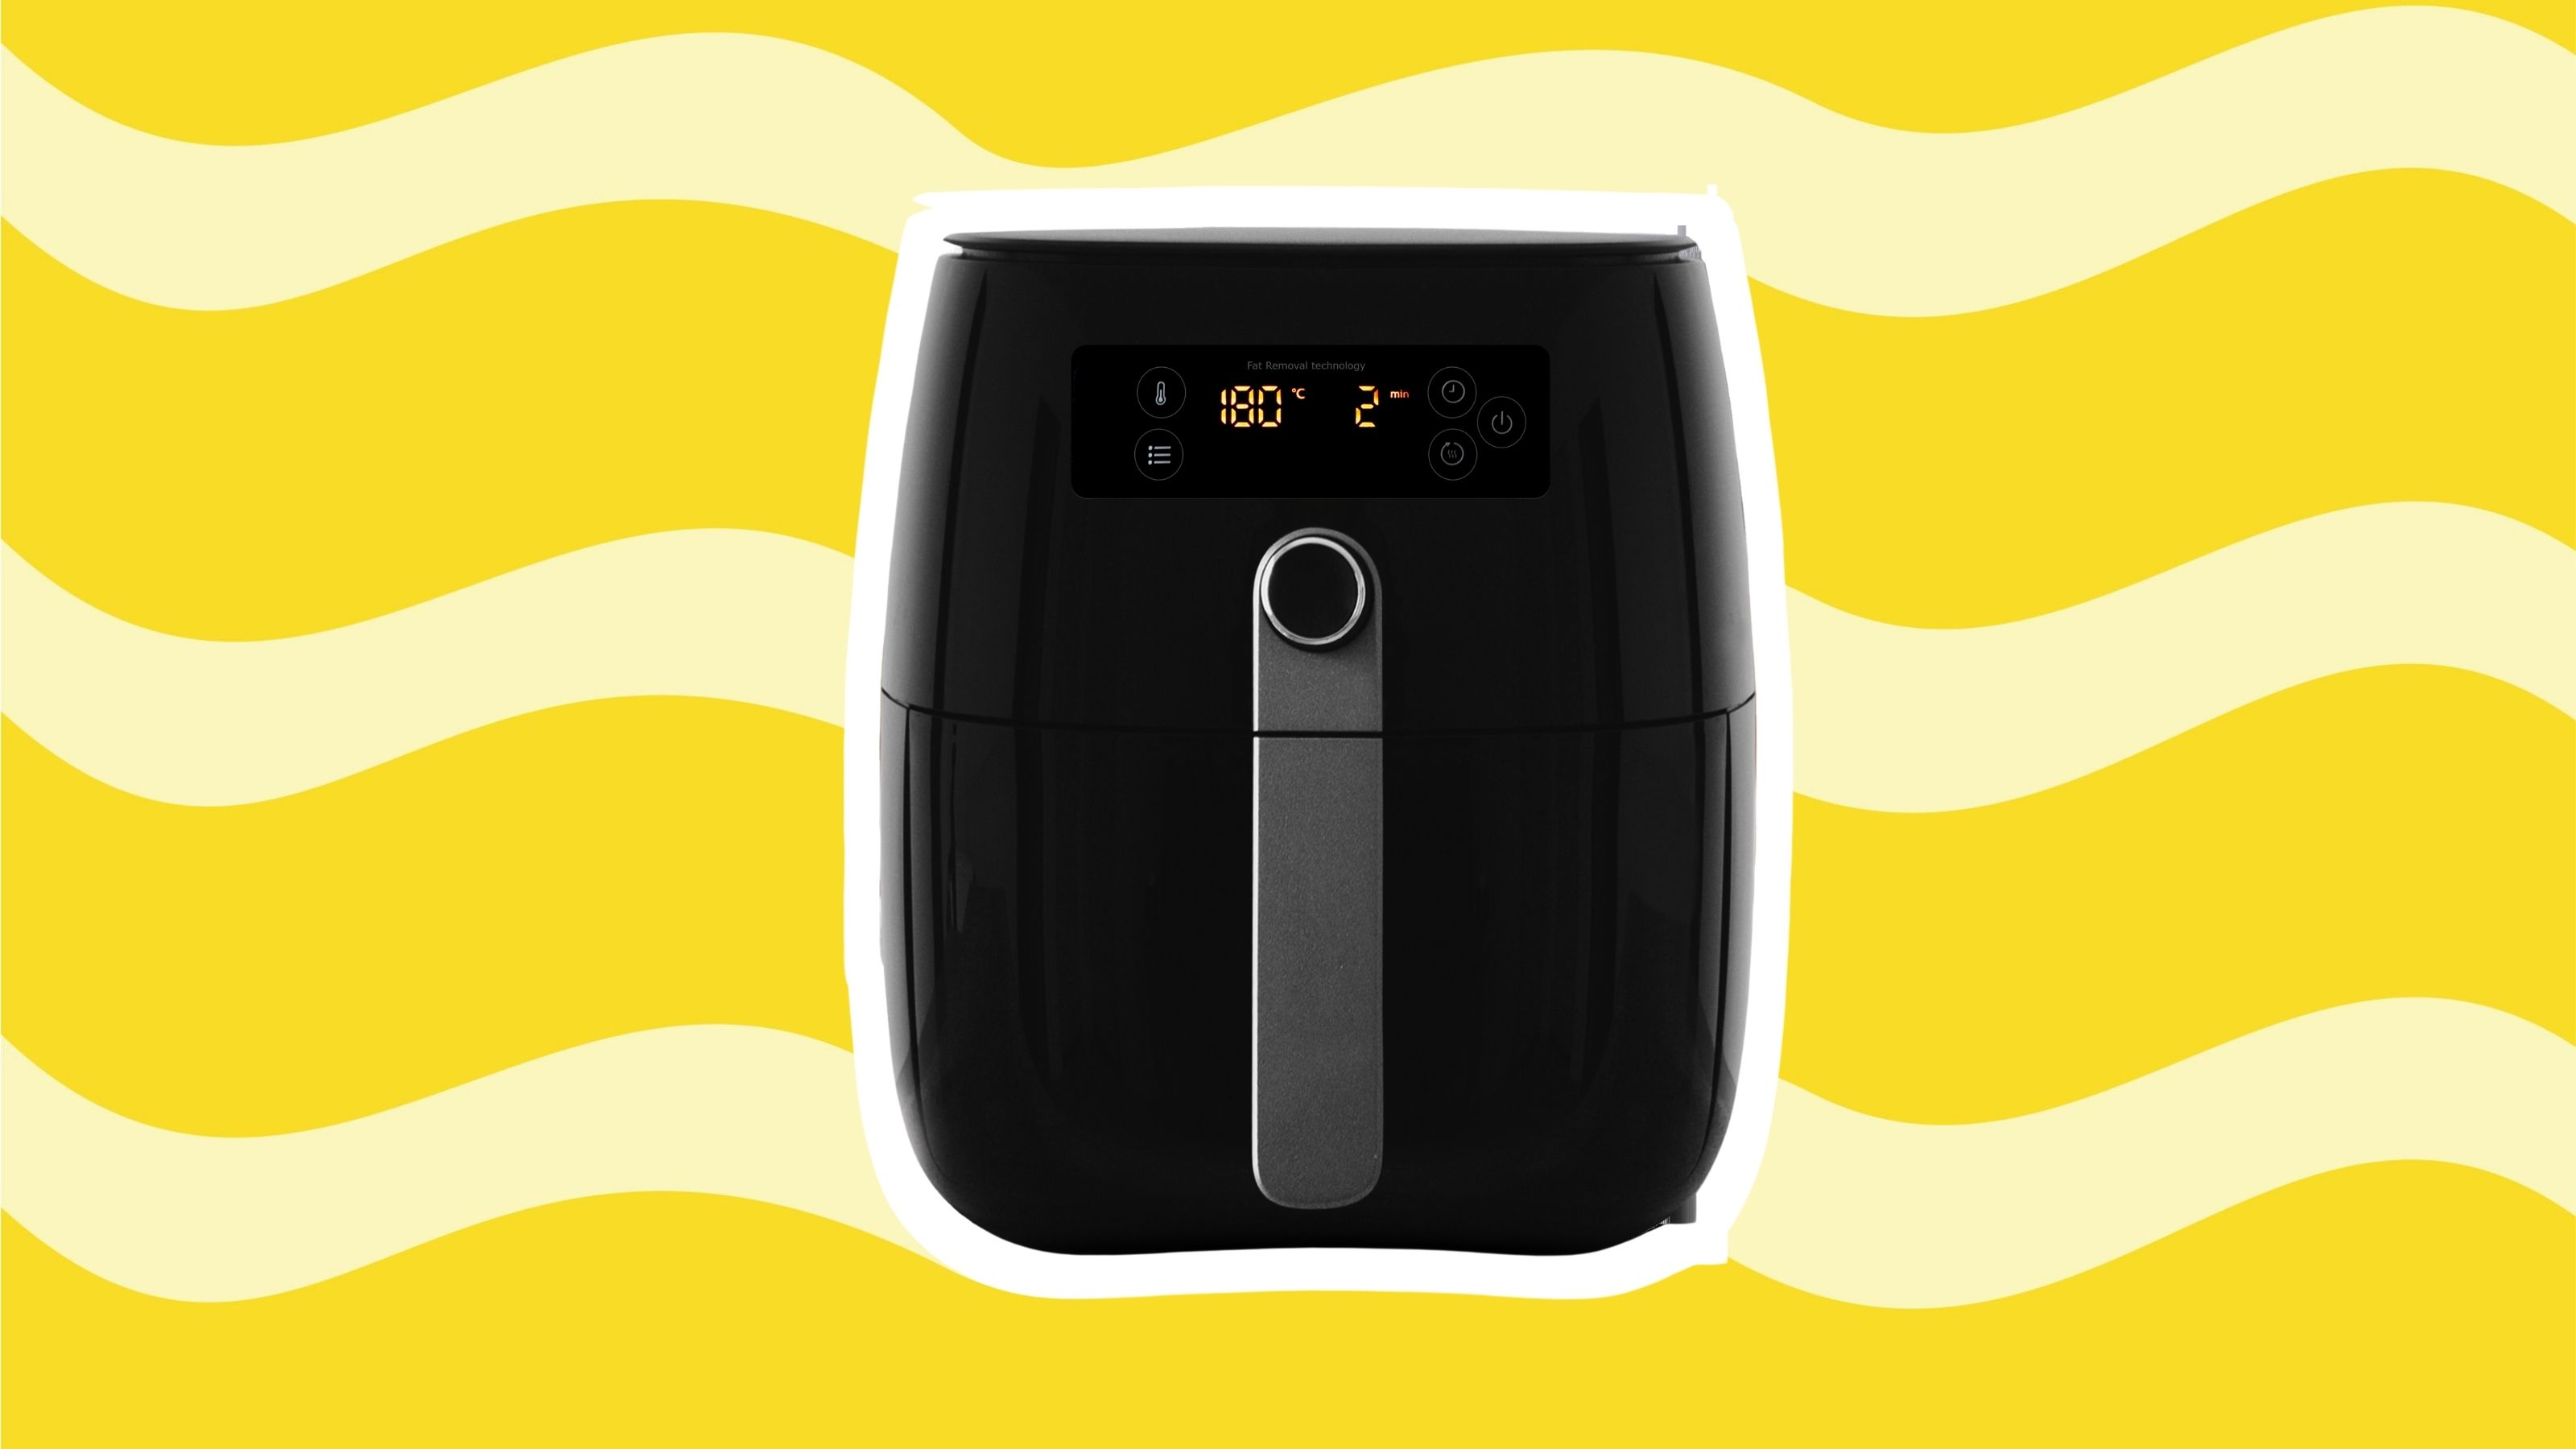 Air Fryer Safety Tips: How to Operate an Air Fryer Safely